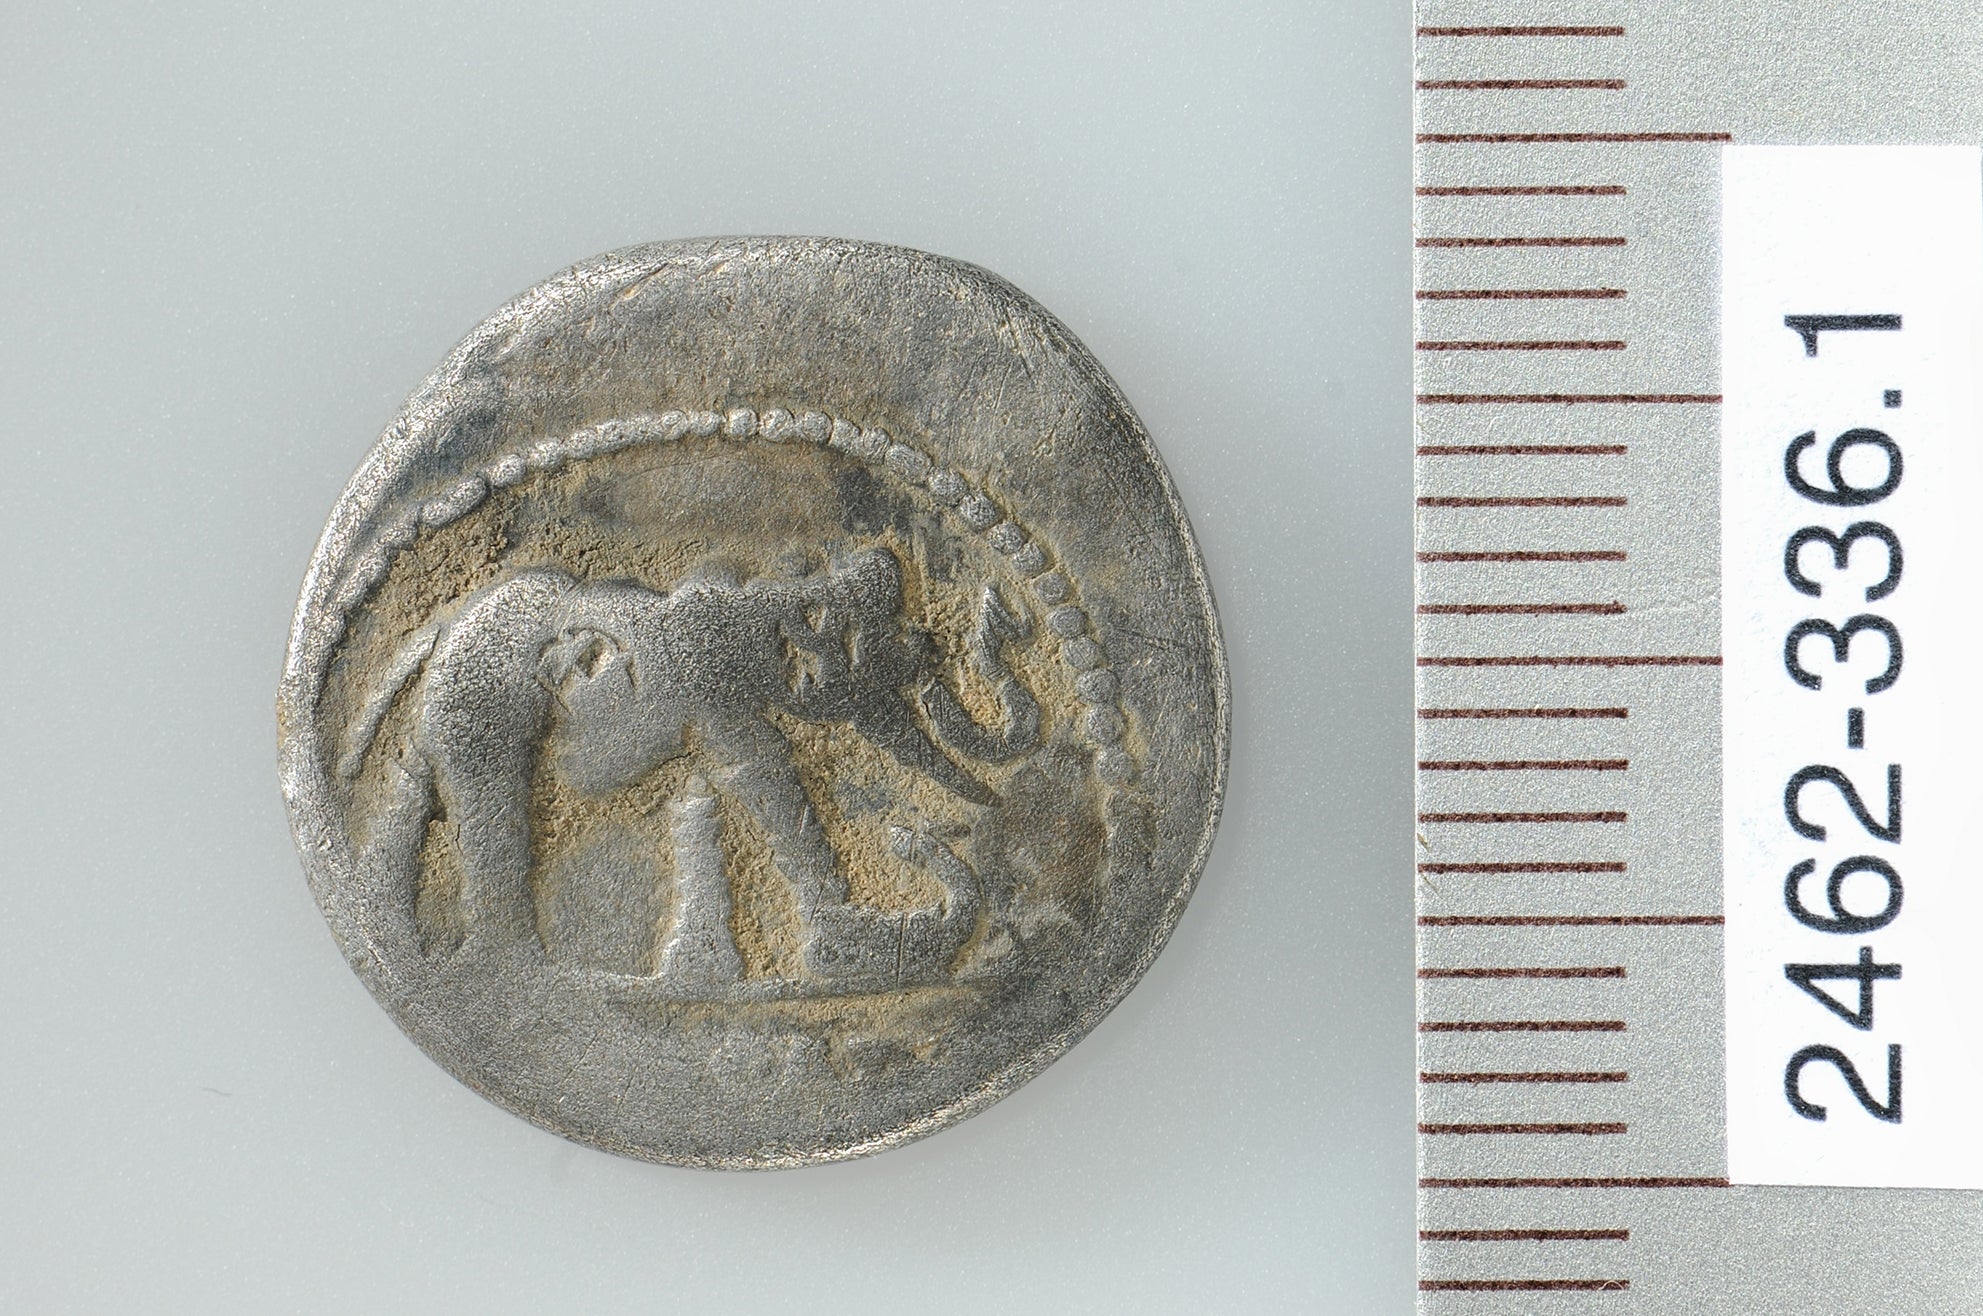 In addition to copper and bronze coins, a silver coin (denarius) of Julius Caesar from the 1st century BCe was also found.The face of the coin shows an elephant trampling on a dragon or snake. CREDIT: ADA Zug, Res Eichenberger.